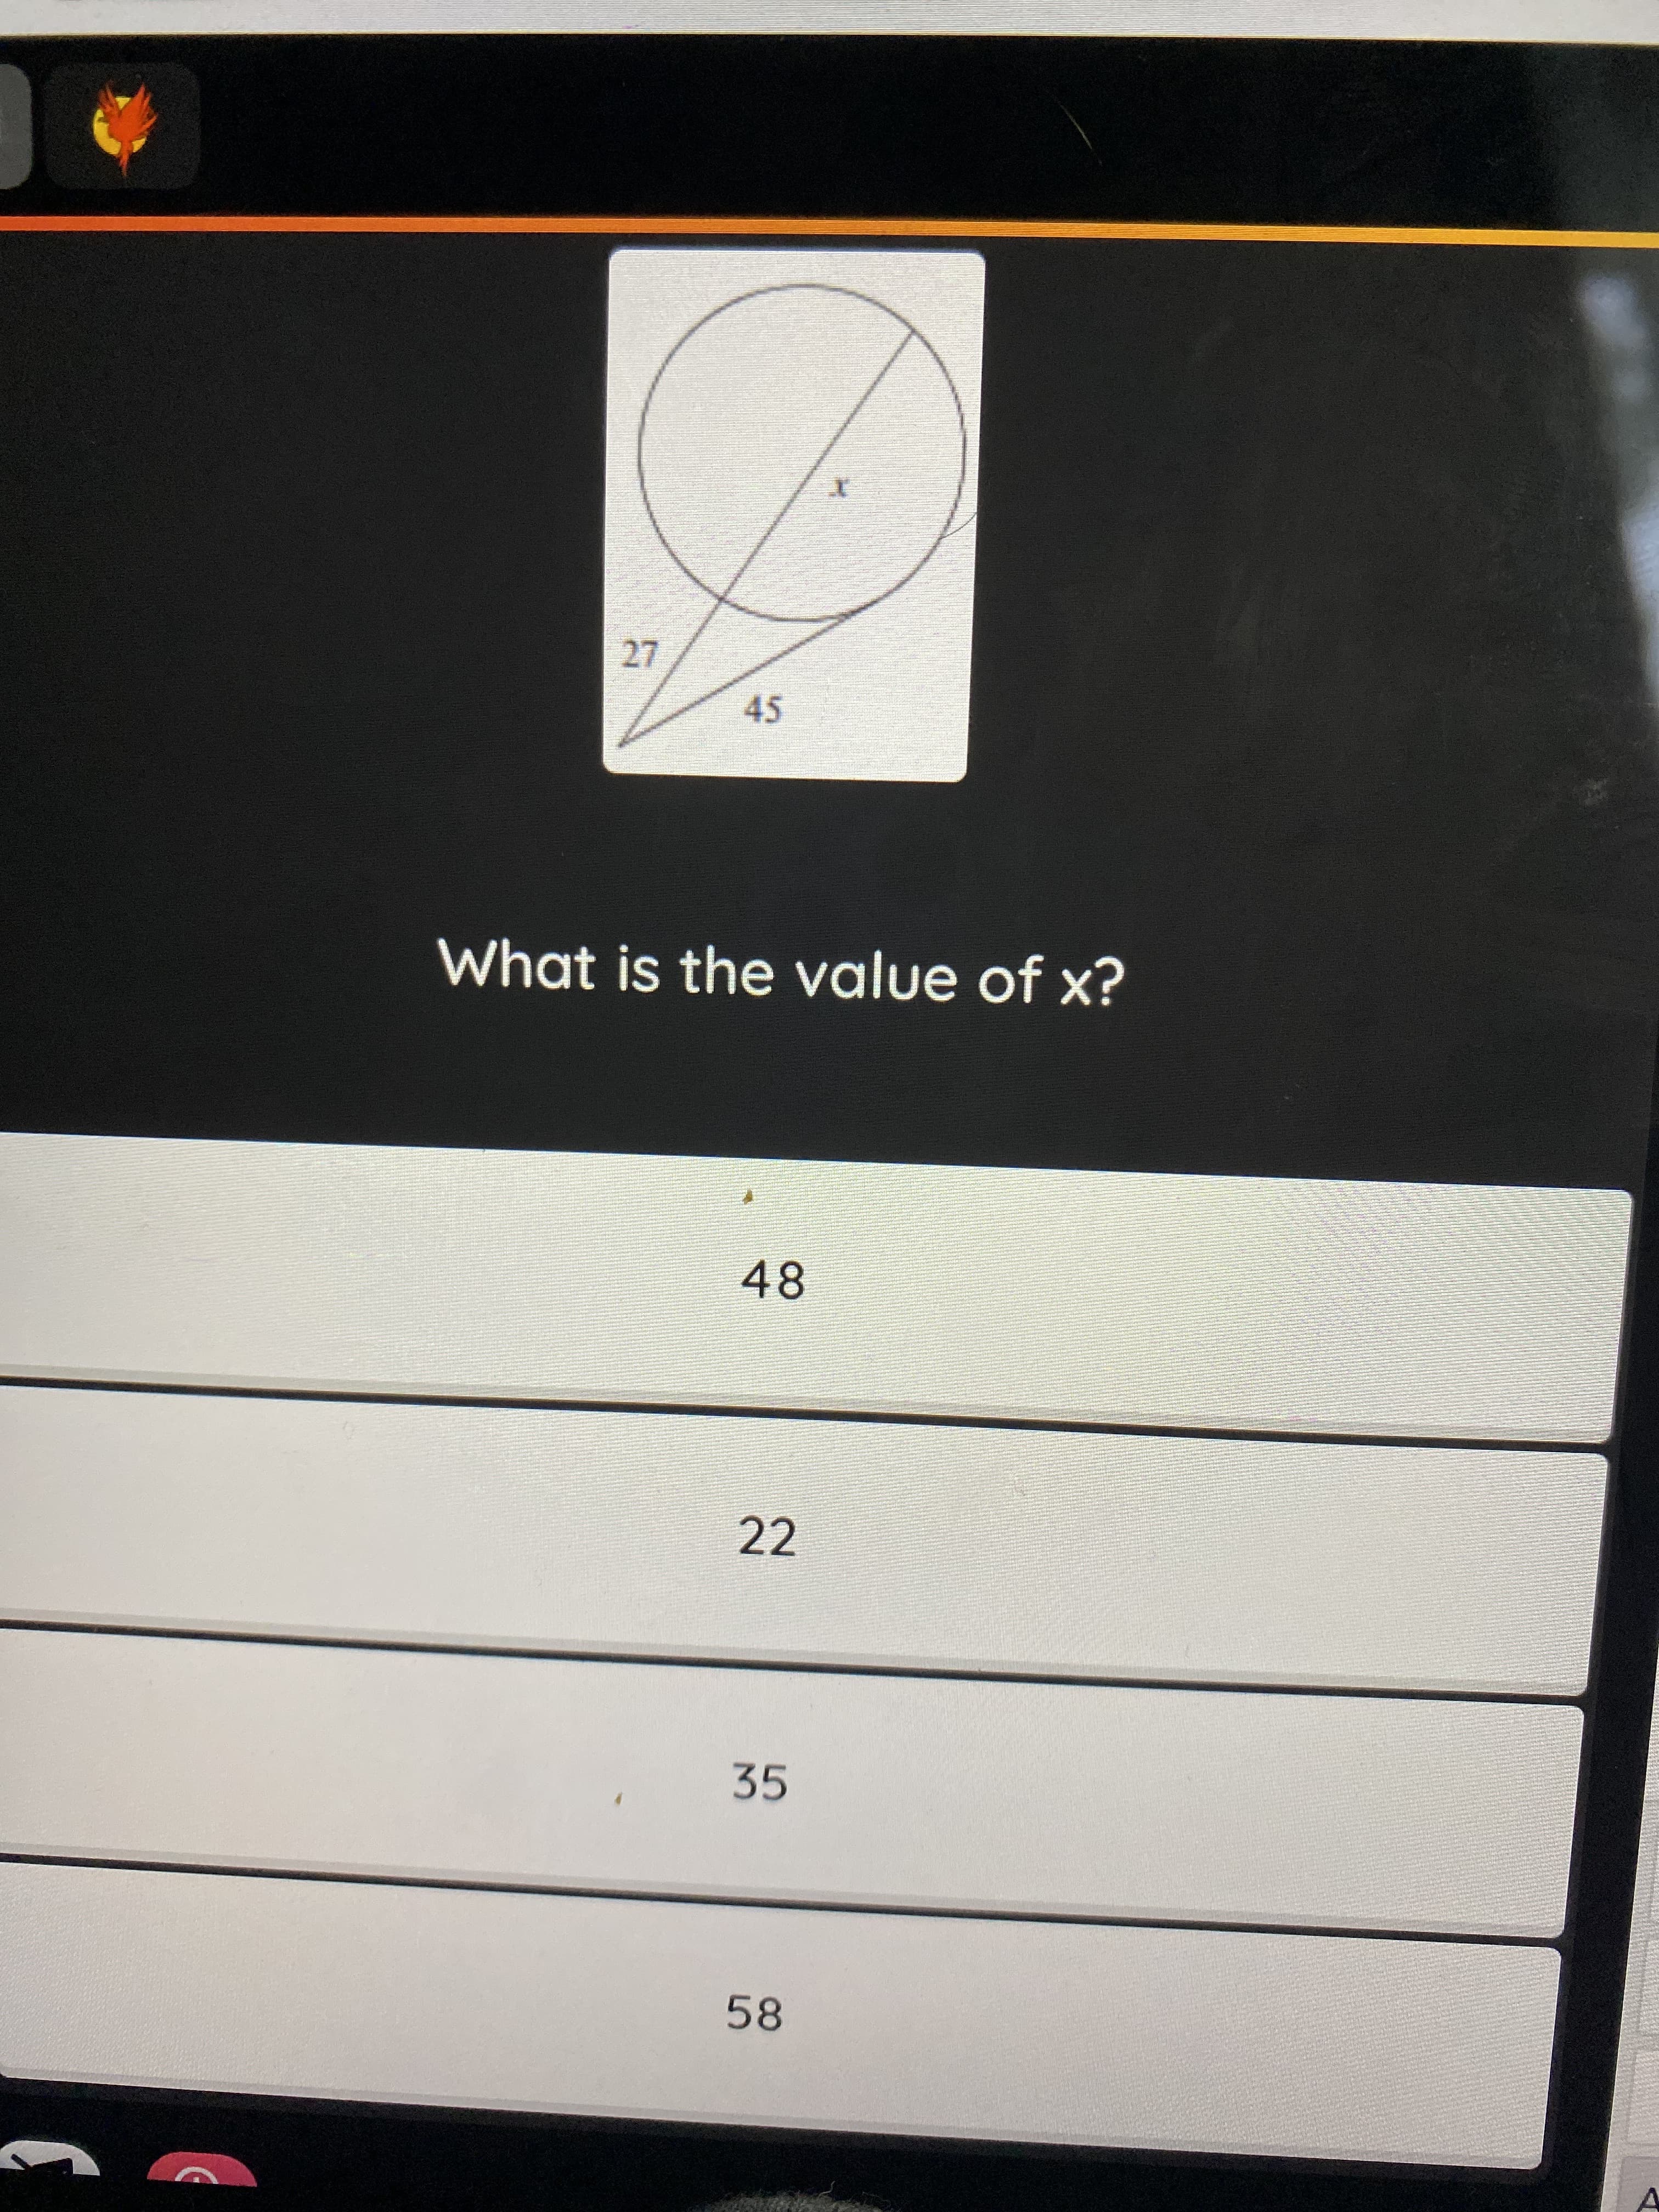 27
45
What is the value of x?
